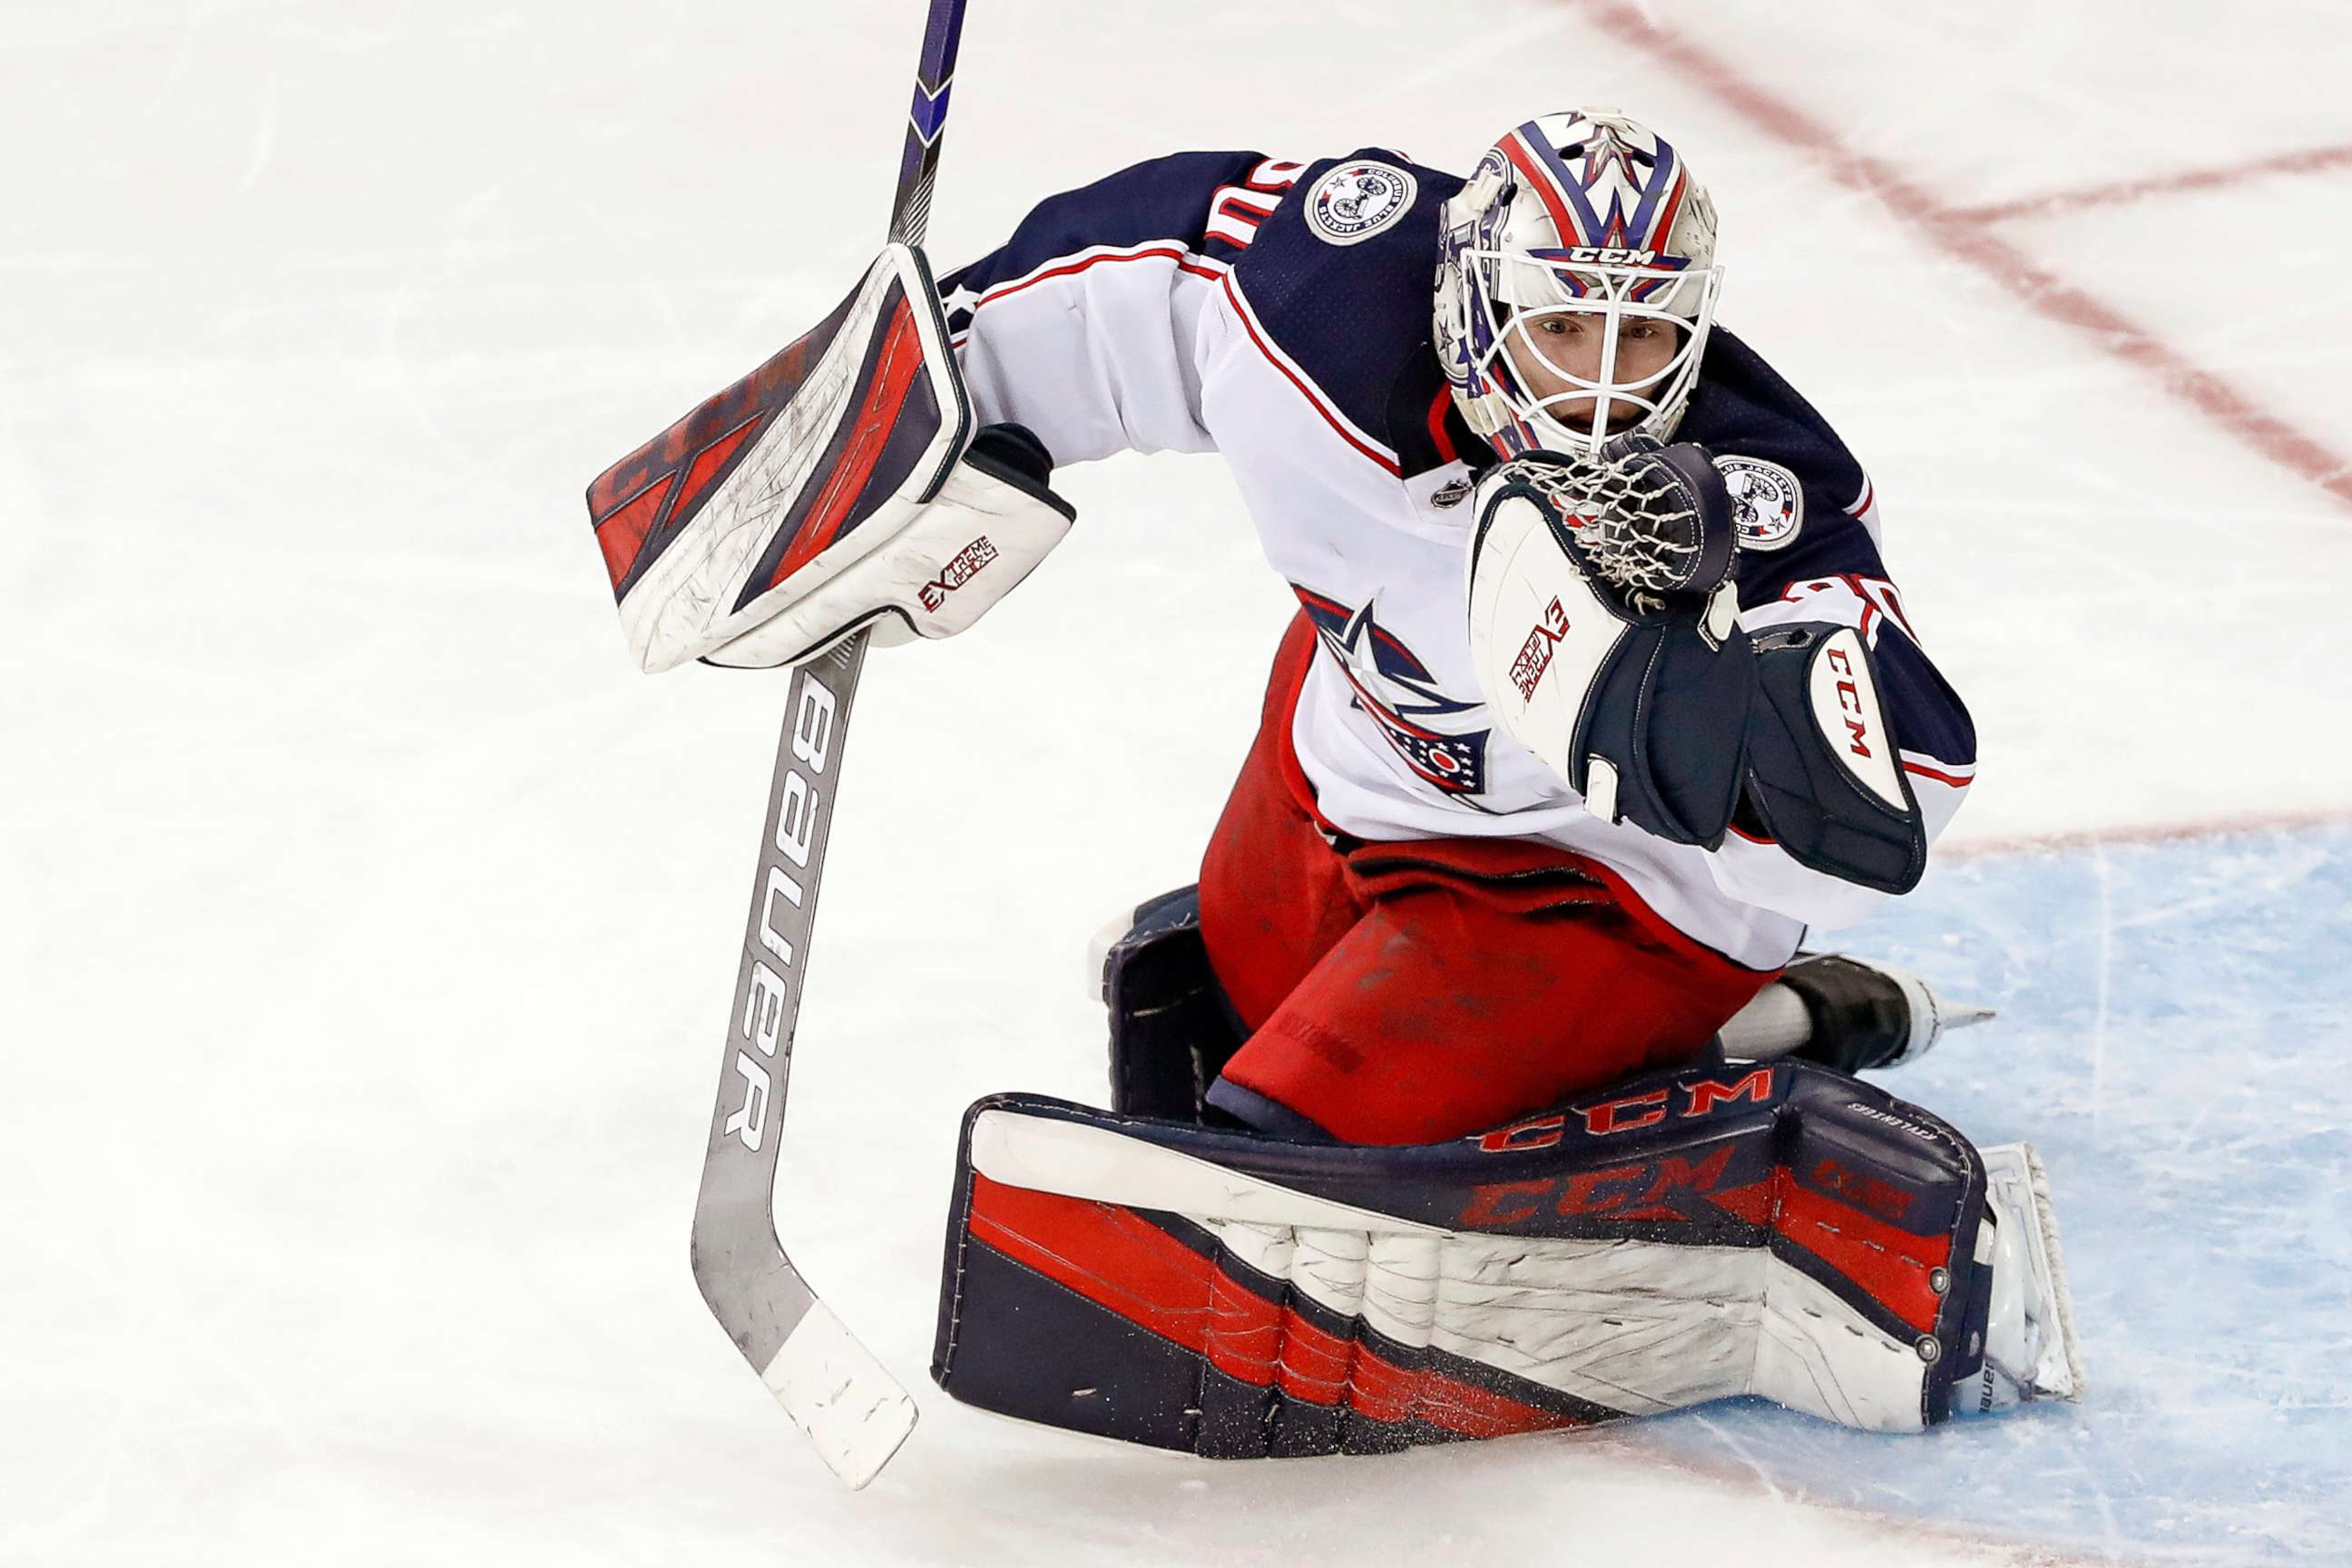 PHOTO: In this Jan. 19, 2020, file photo, Columbus Blue Jackets goaltender Matiss Kivlenieks has the puck in his hand as he makes a save during the third period of an NHL hockey game against the New York Rangers in New York.